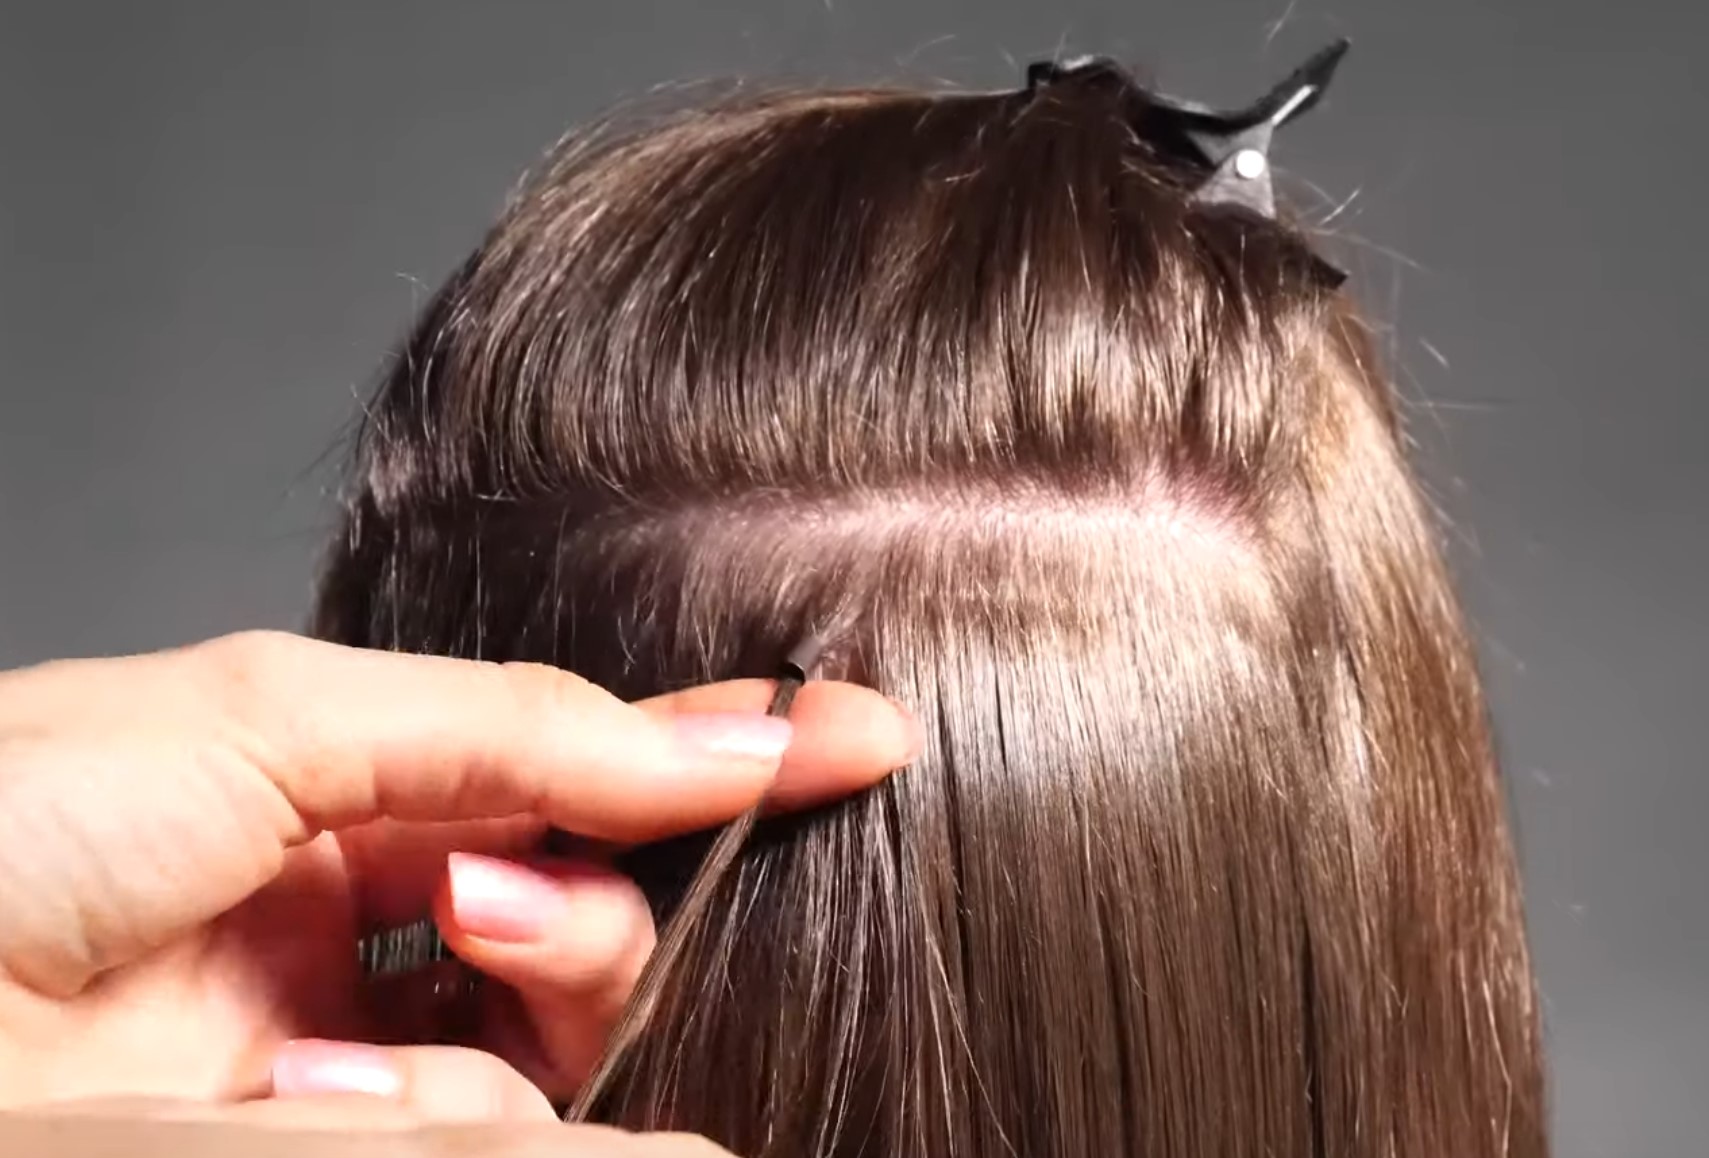 What you need to know about Micro-Ring Hair Extensions